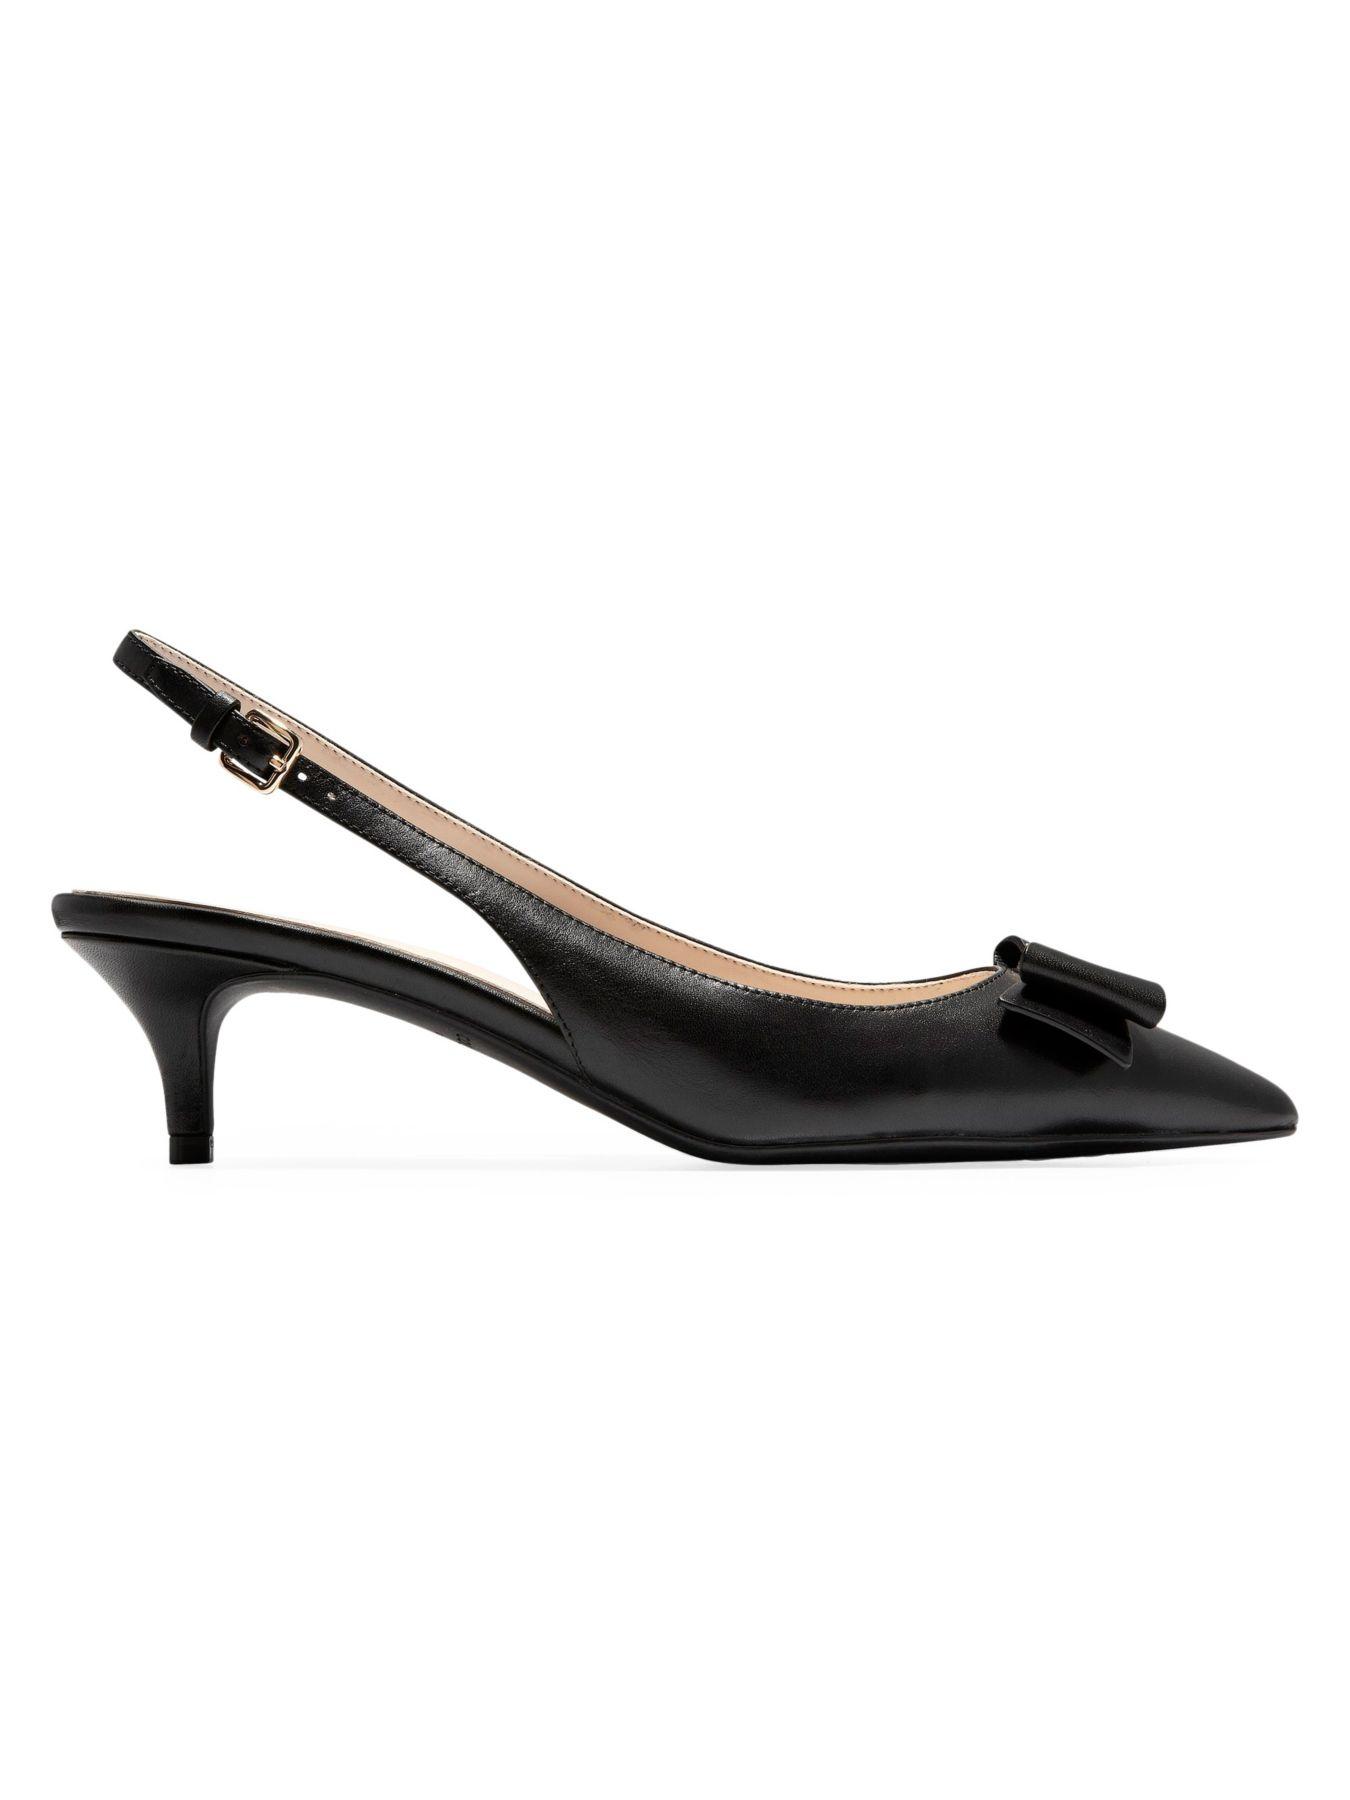 Cole Haan Tali Bow Leather Slingback Pumps in Black - Lyst